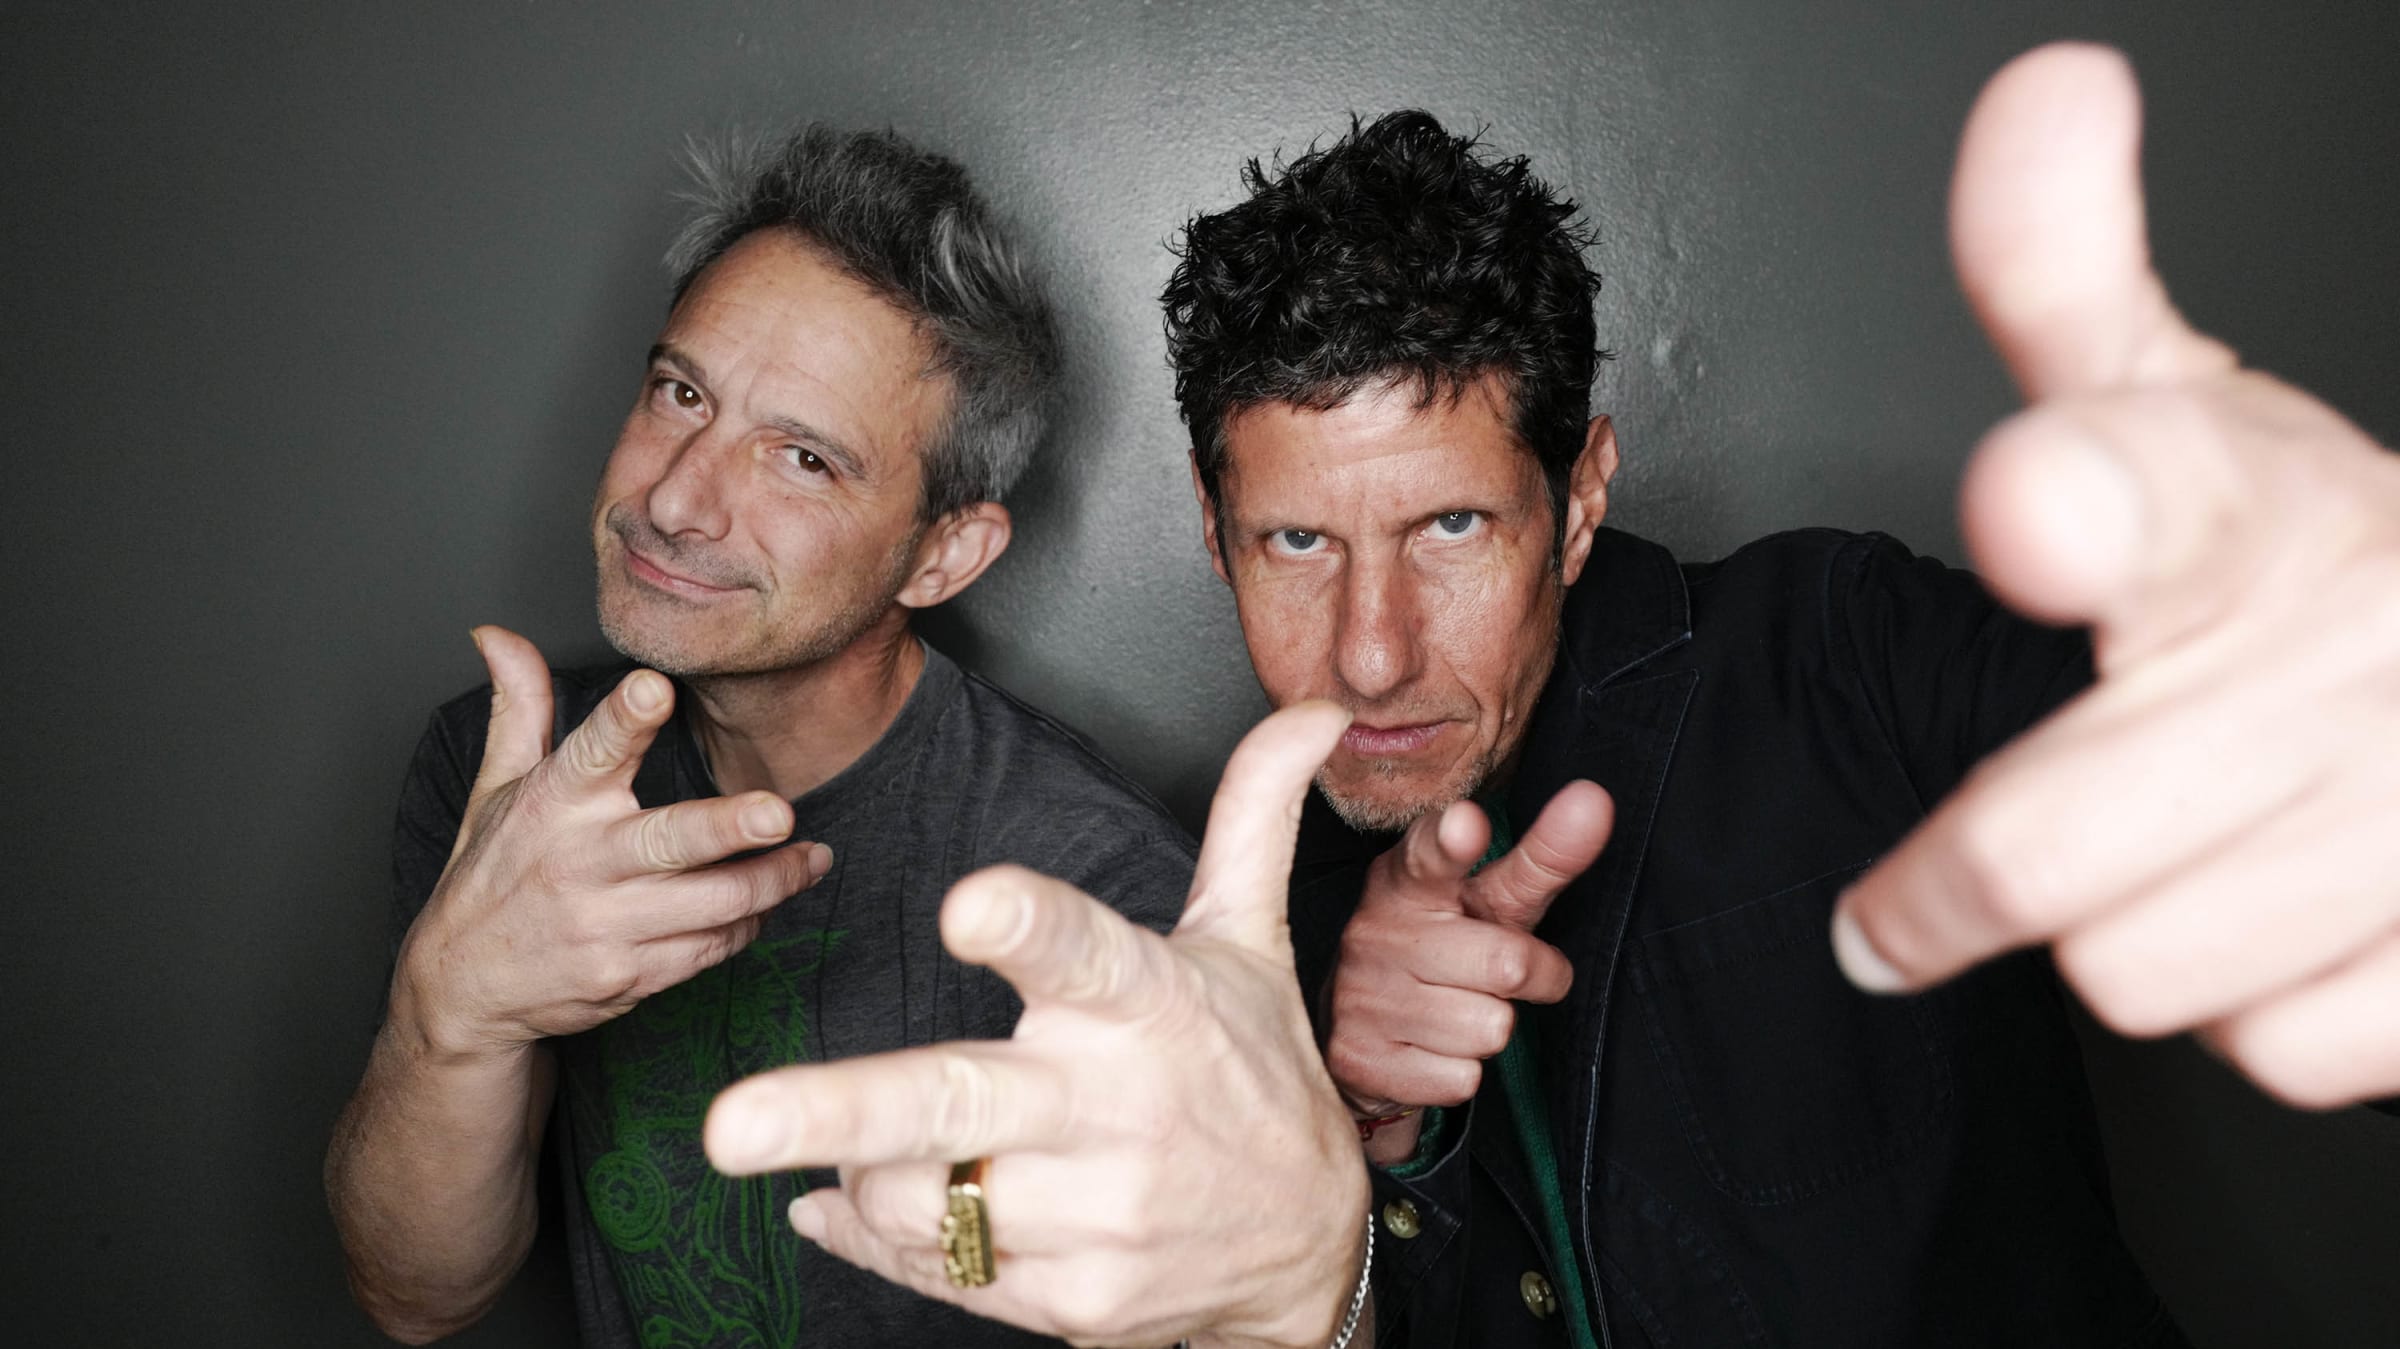 The Beastie Boys on Why They Want to Give Trump Their Giant Dick in a picture